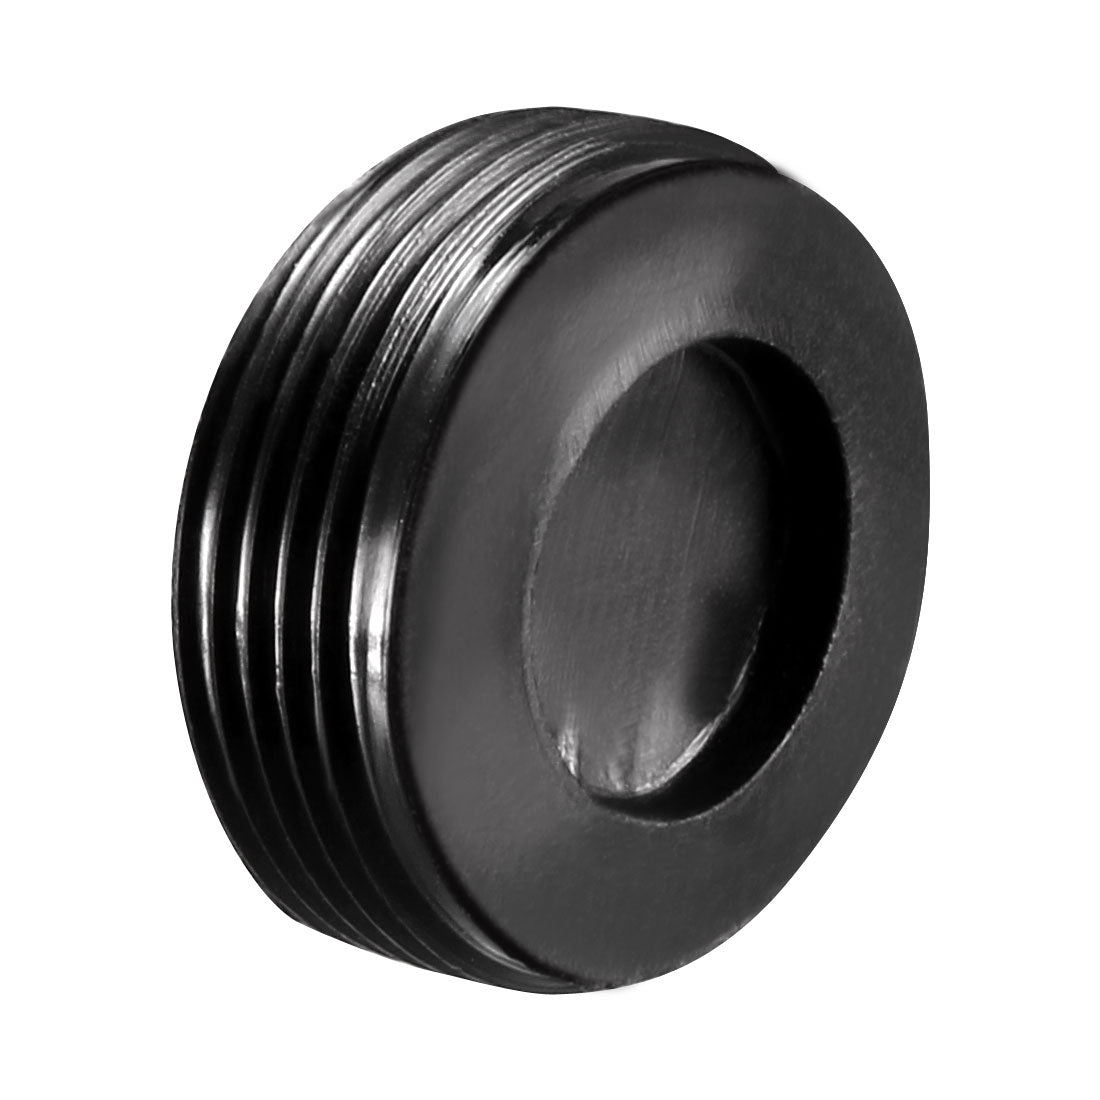 uxcell Uxcell Carbon Brush Holder Caps 18mm O.D. 6.3mm Thickness Motor Brush Cover Plastic Fitting Thread Black 2pcs